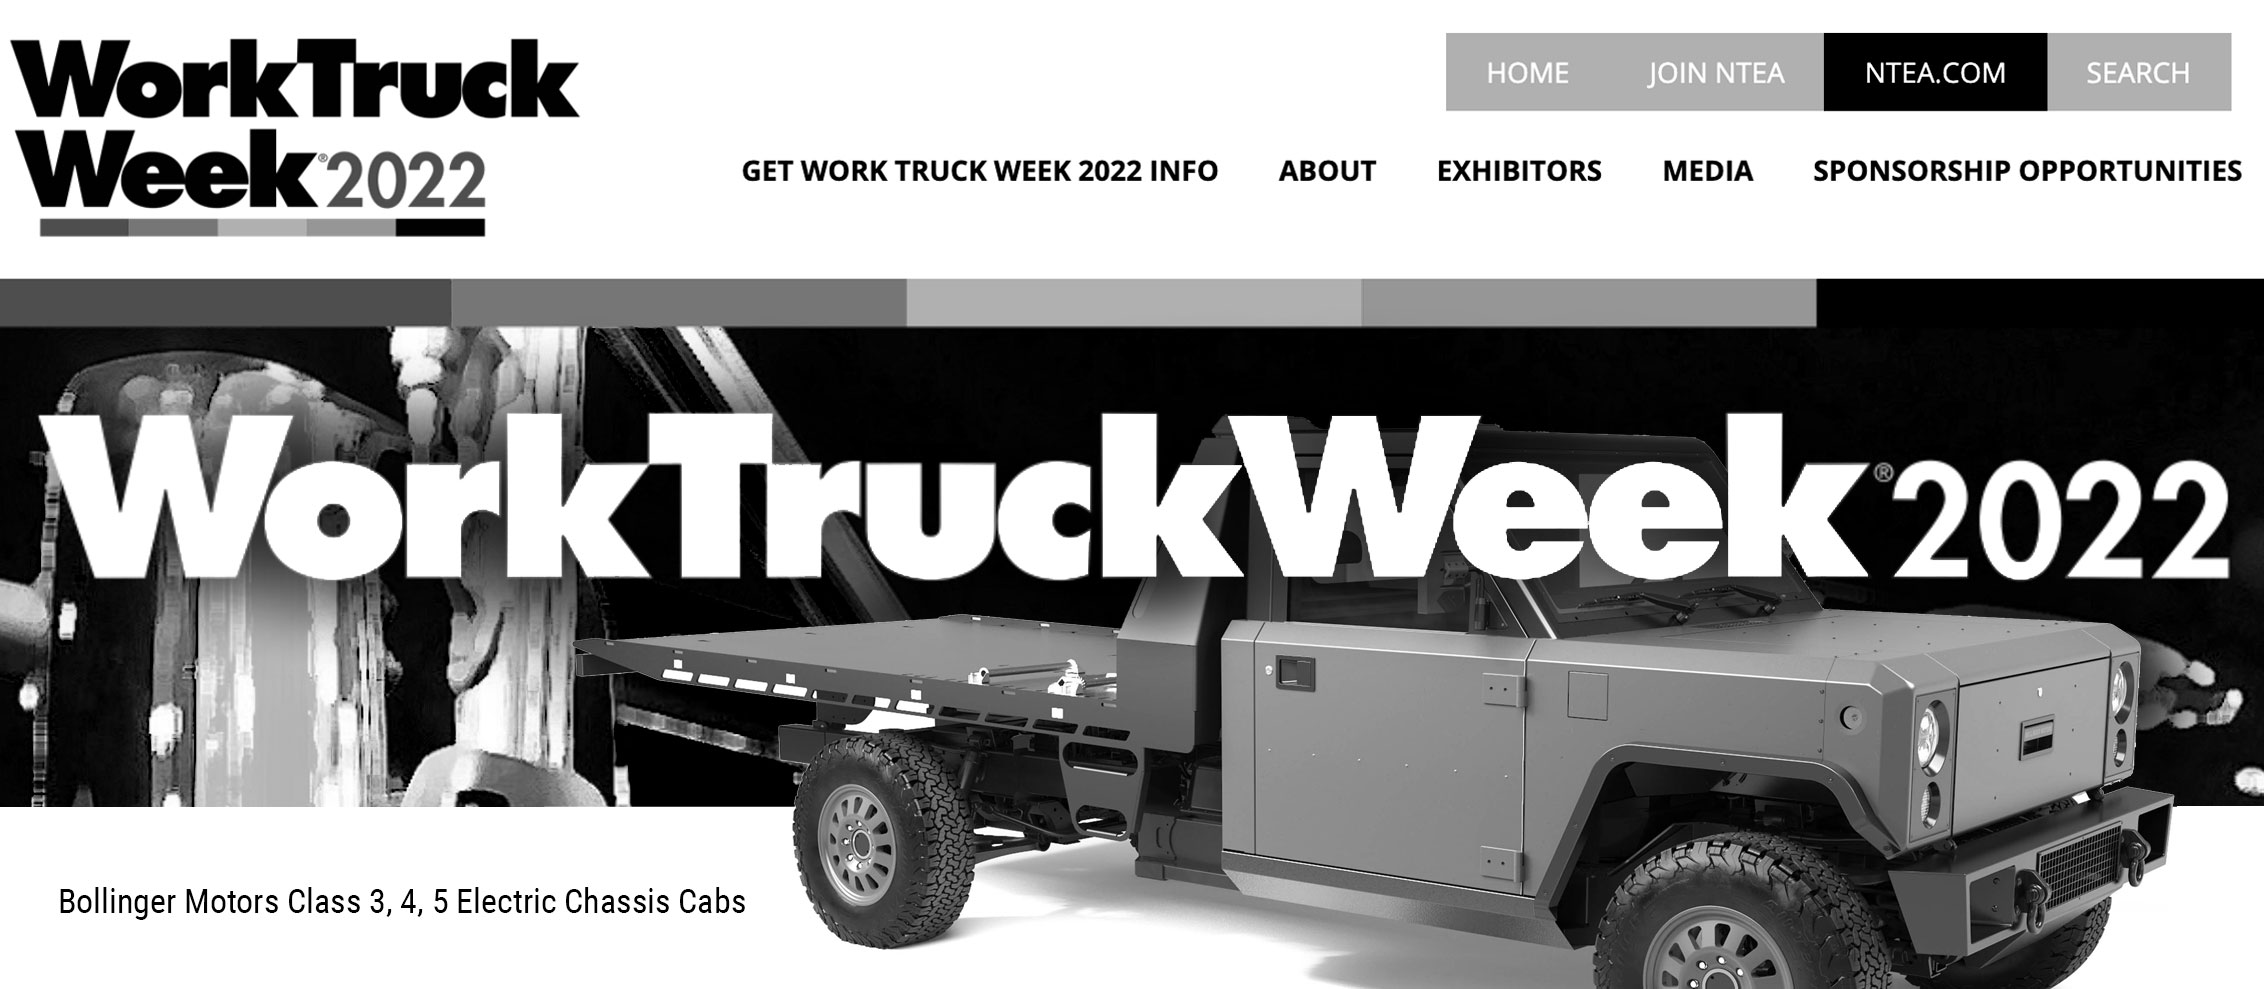 Work Truck Week Home page with Bollinger Chassis Cab featured on it